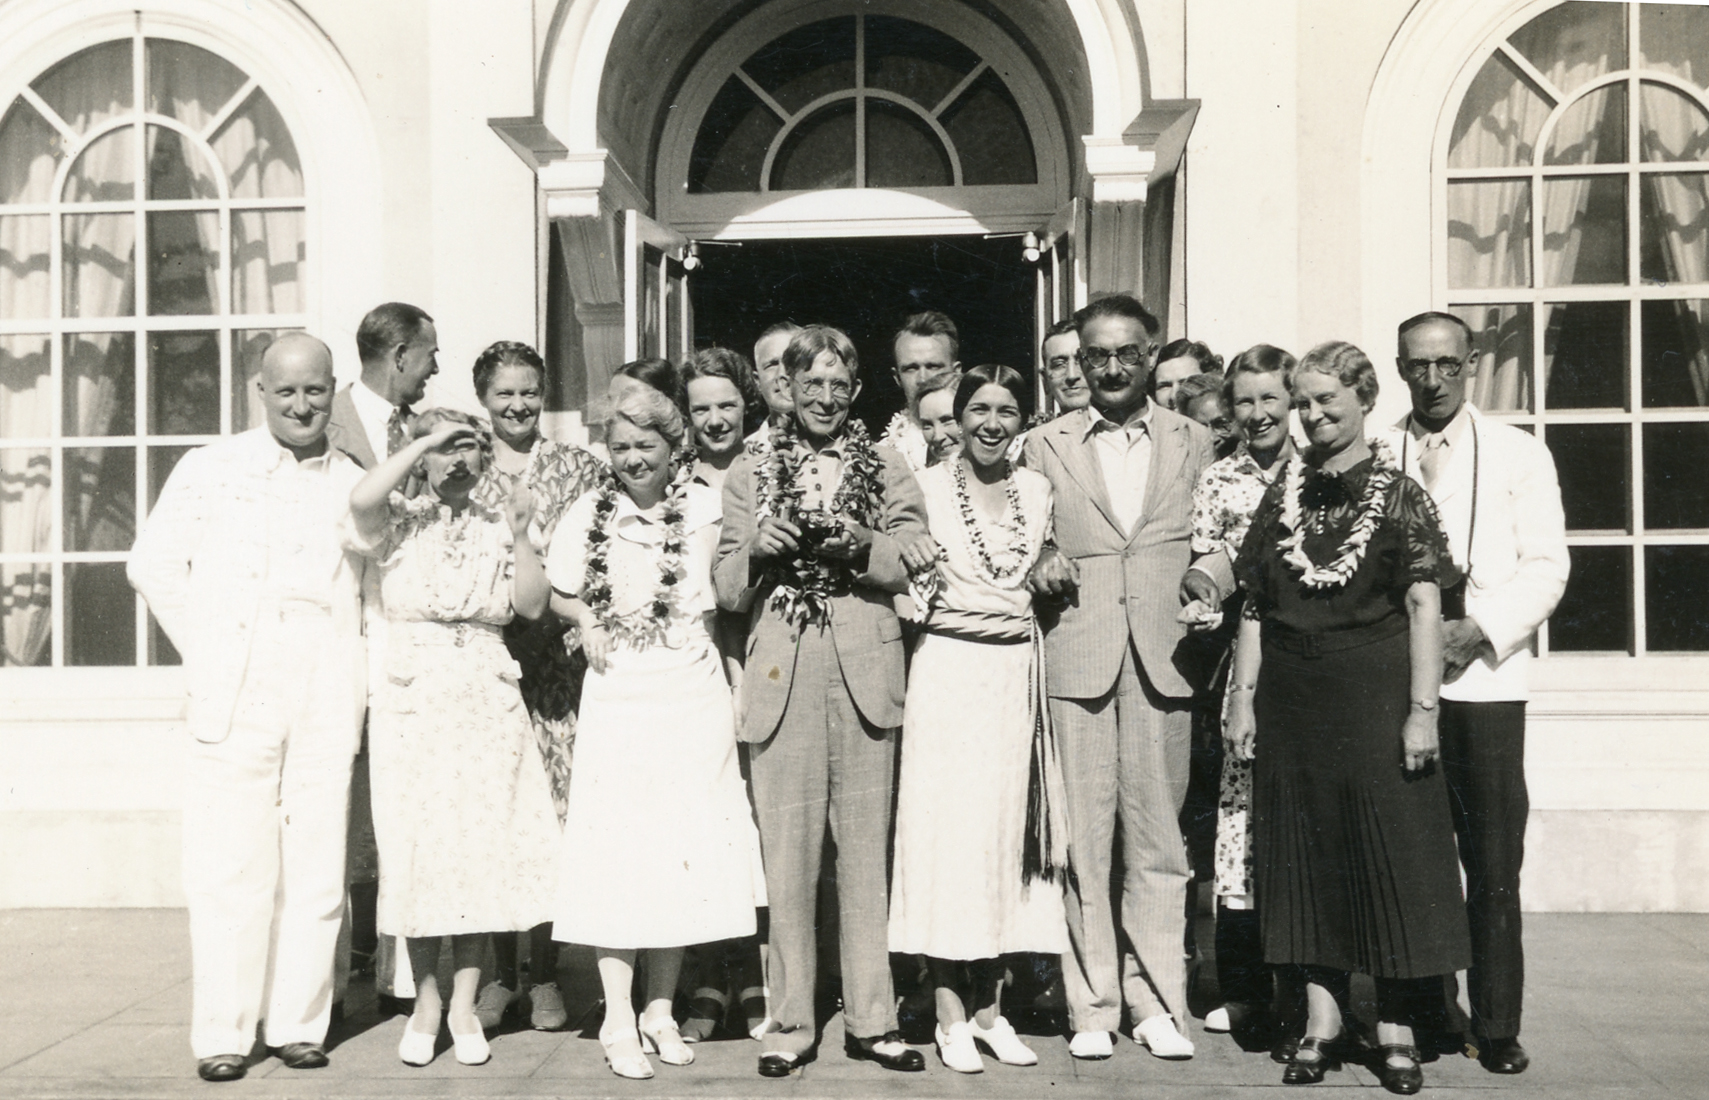 Delegates to the 1936 Hawai'i Seminar Conference on Native Education in Pacific Countries, <i>Journal of Anthropological Visit to United States and Europe, 1936/37</i>. Tindale Papers, South Australian Museum Archives, AA 338/5/26/12/1